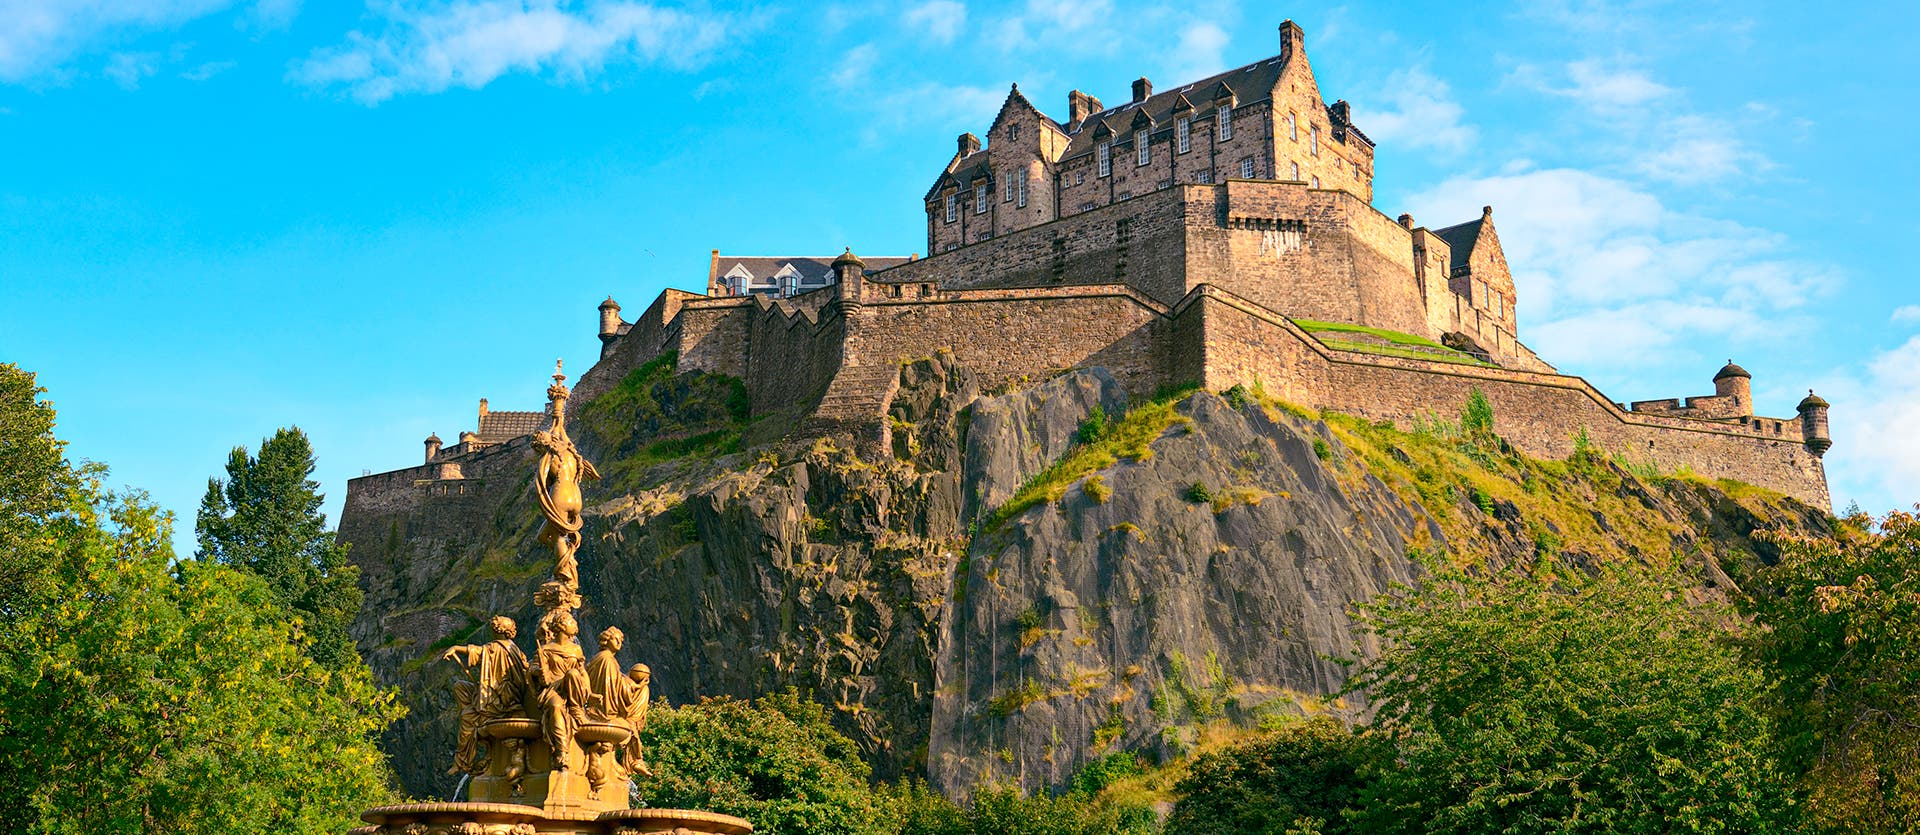 What to see in Écosse Edinburgh